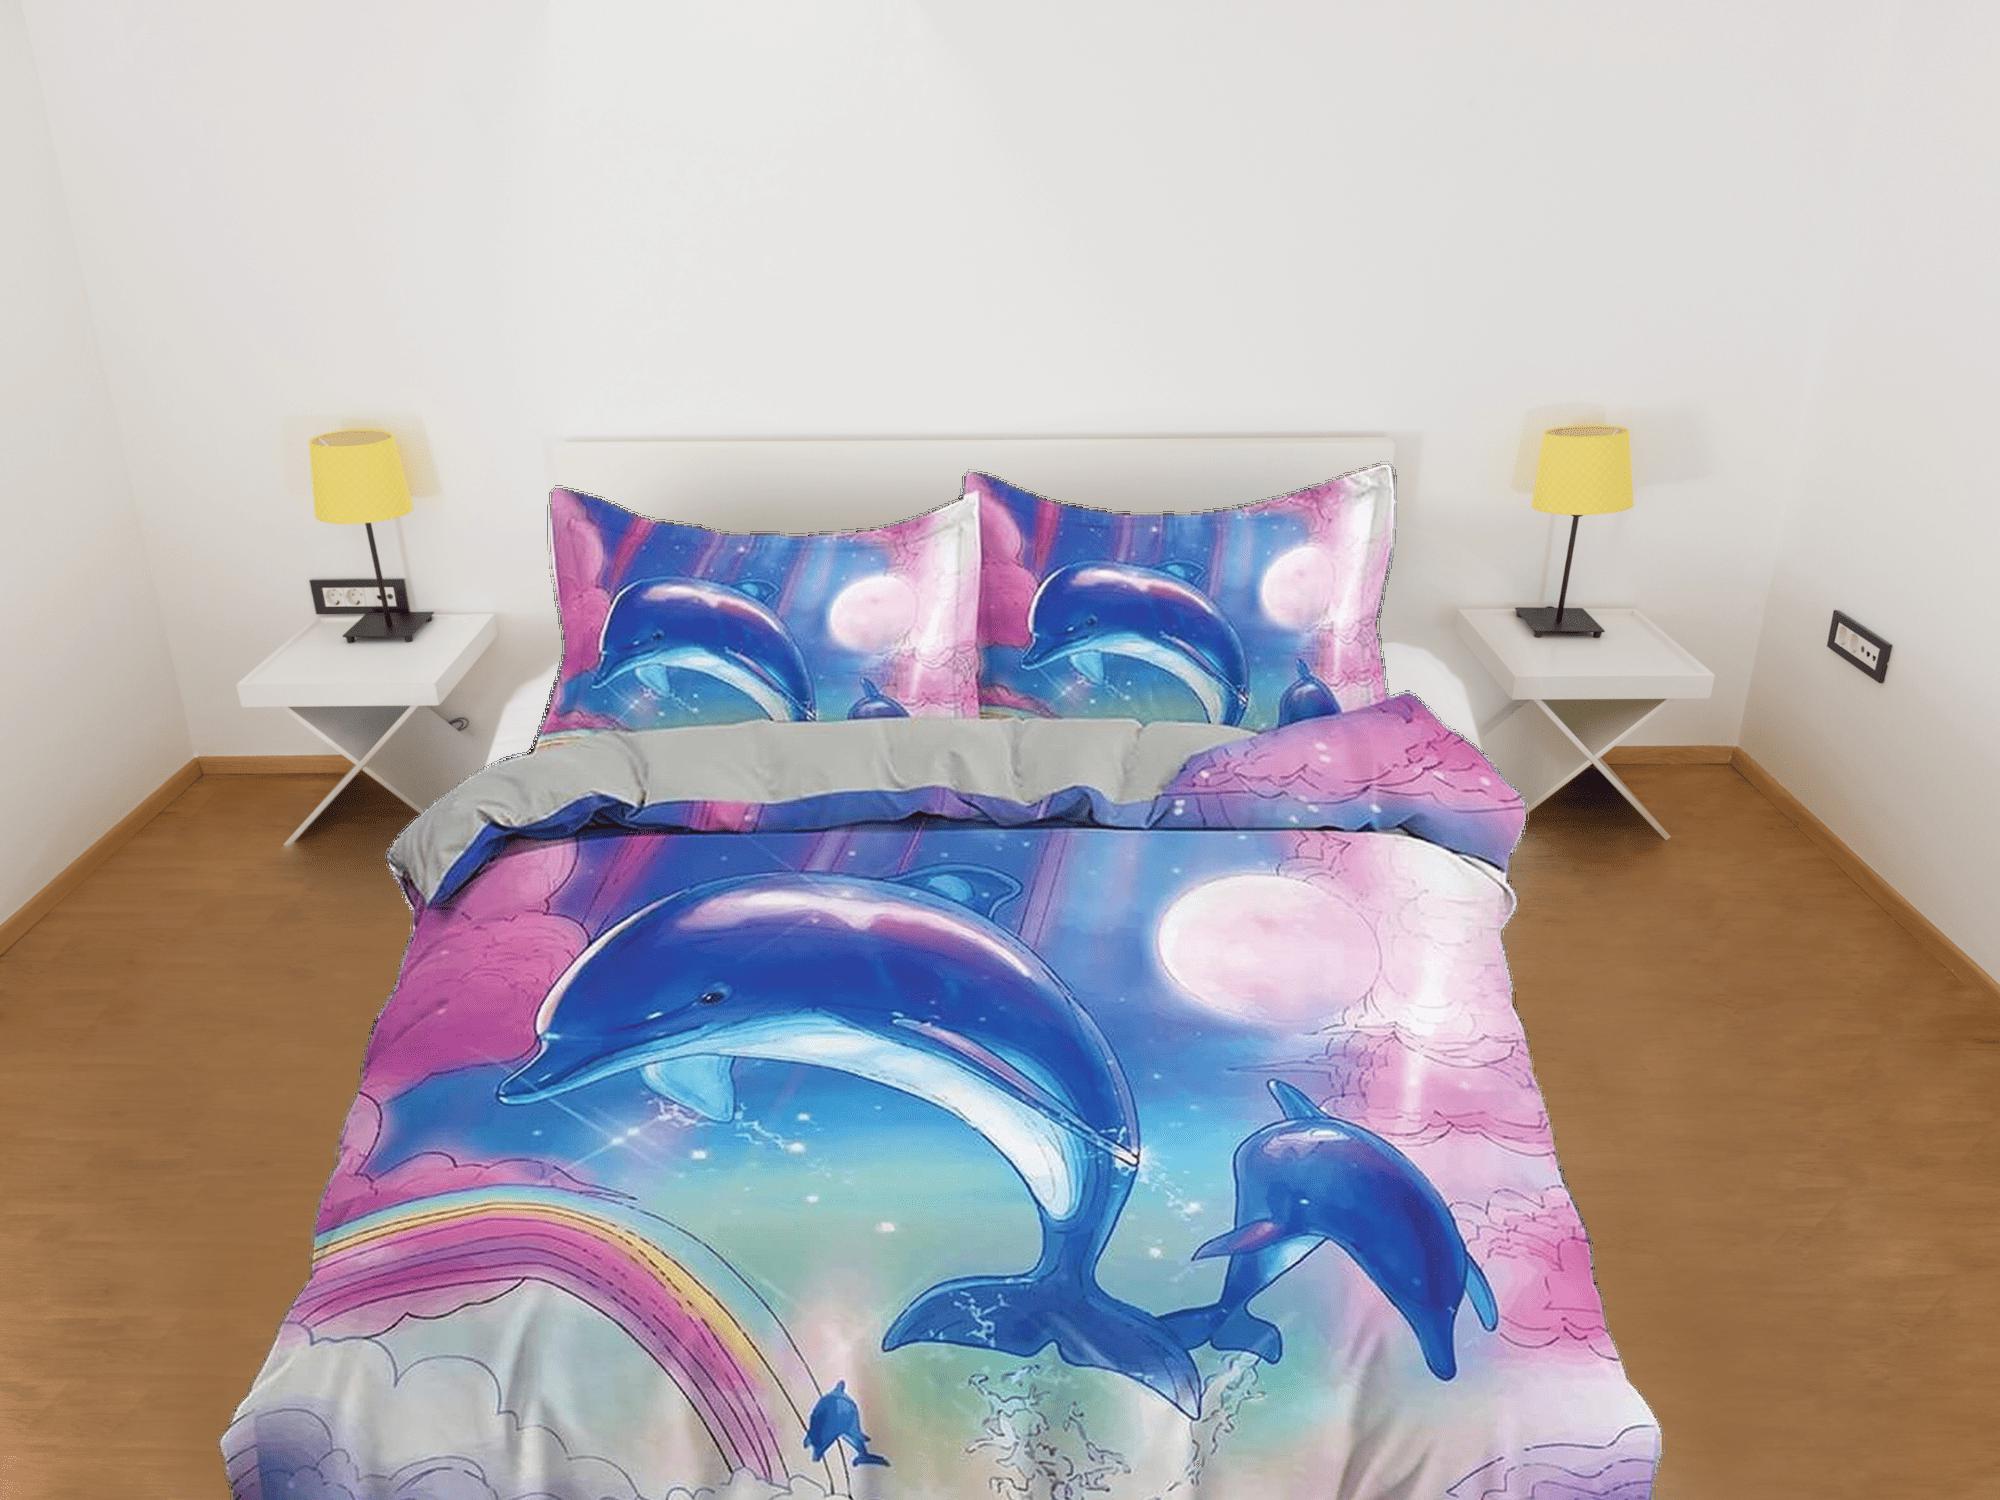 daintyduvet Cute dolphin bedding colorful duvet cover, ocean blush decor, pink and blue bedding set full king queen twin, college dorm bedding gift